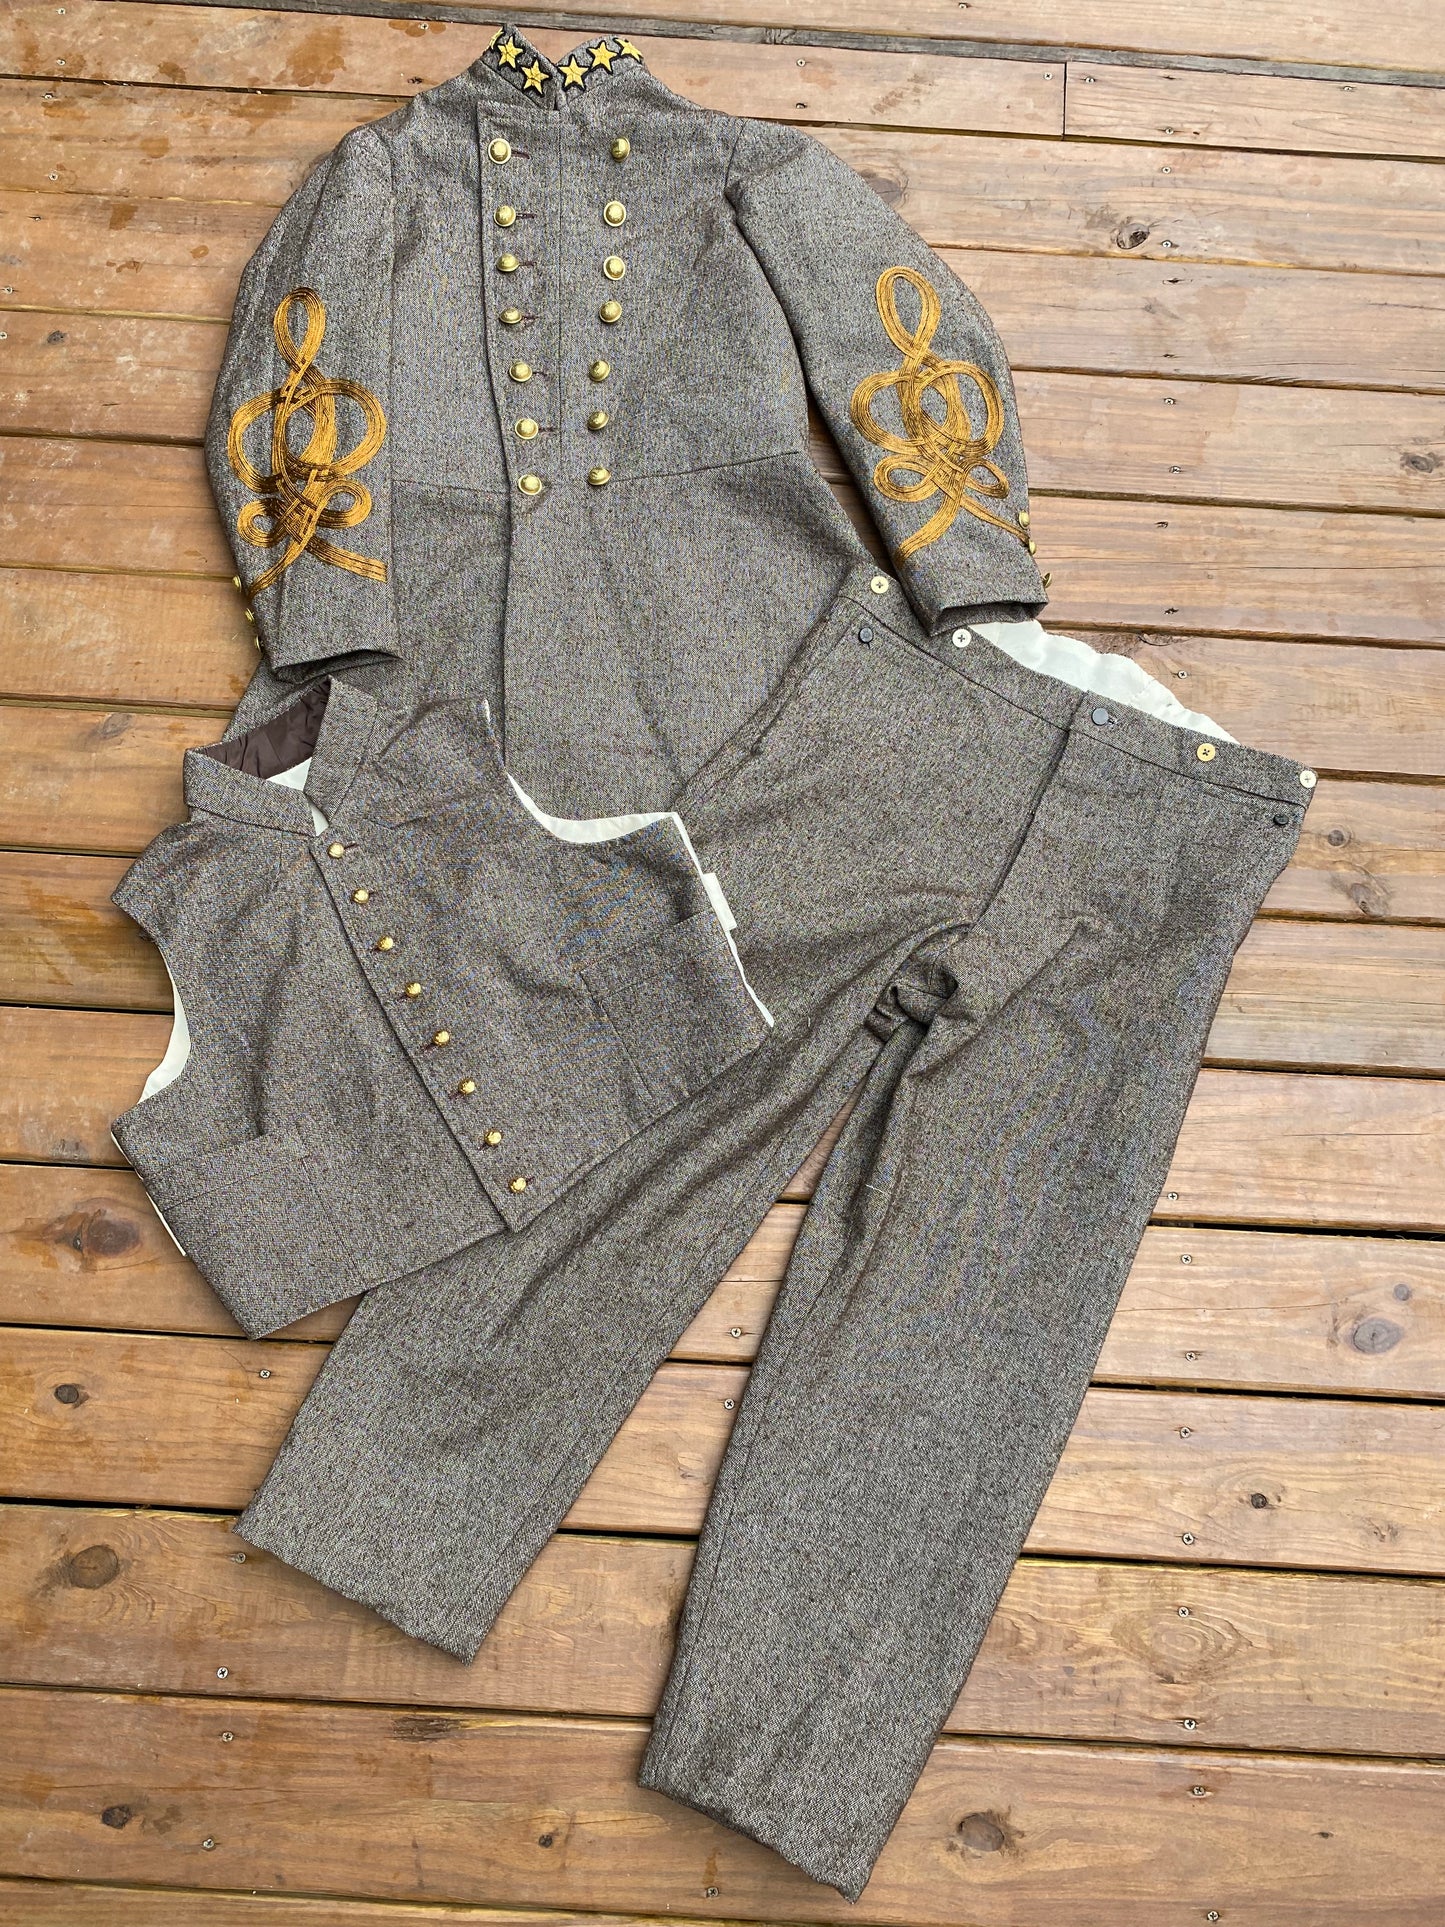 Confederate Officer Trousers "Deep South" Jean